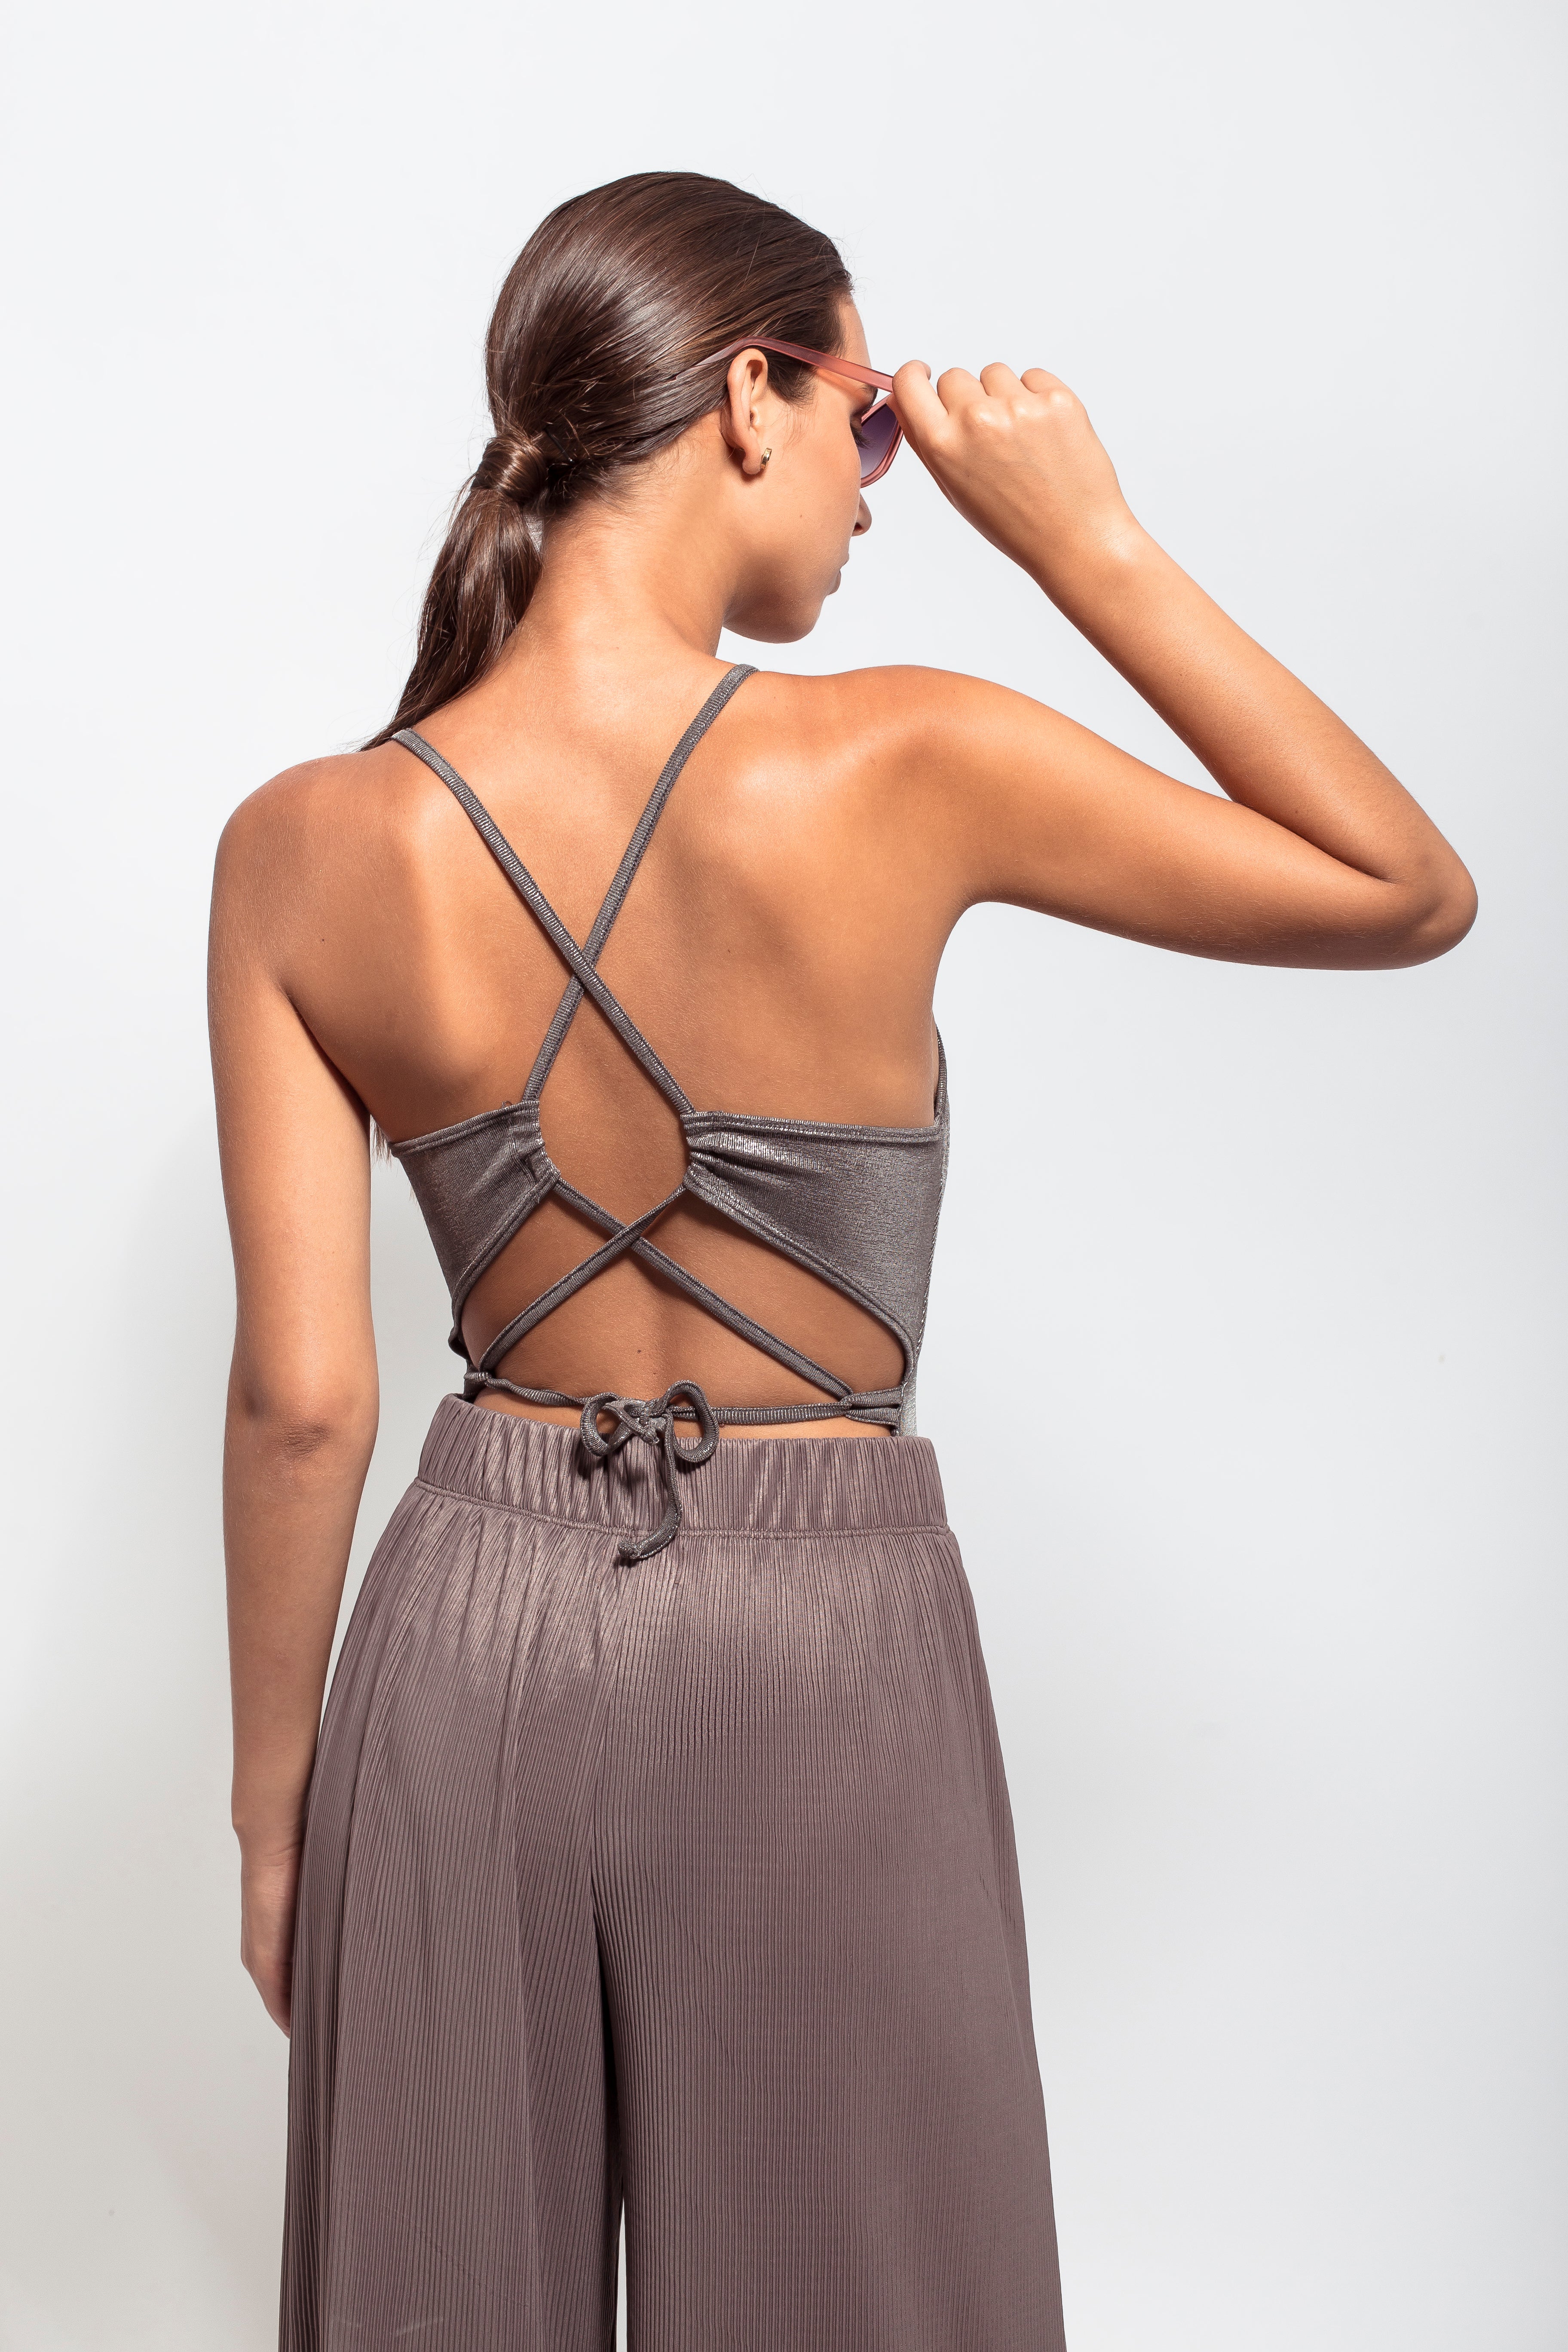 Metallic squared neck bodysuit with a crisscross open back. Pair it with some loose pants and sandals!